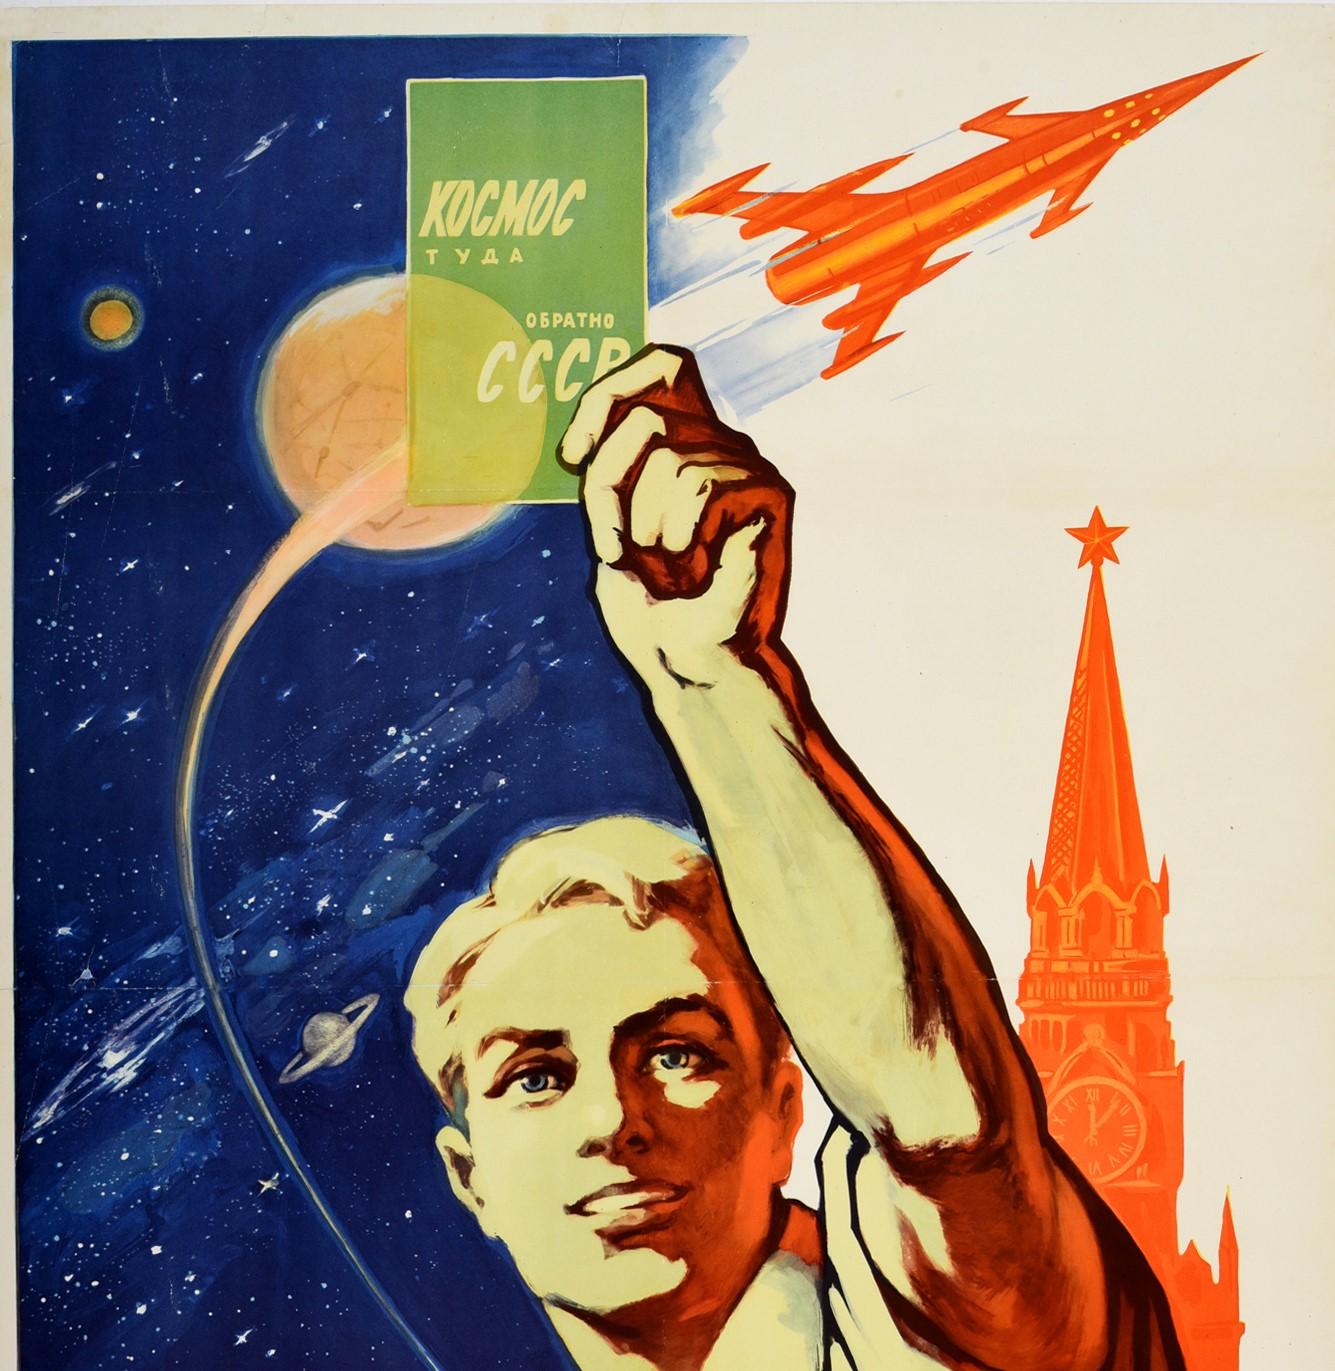 Original vintage Soviet space propaganda poster - Comrades! Soviet land henceforth became the shore of the universe! / ????????! ????????? ????? ?????? ????? ??????? ?????????! - featuring a dynamic design featuring a young man smiling at the viewer